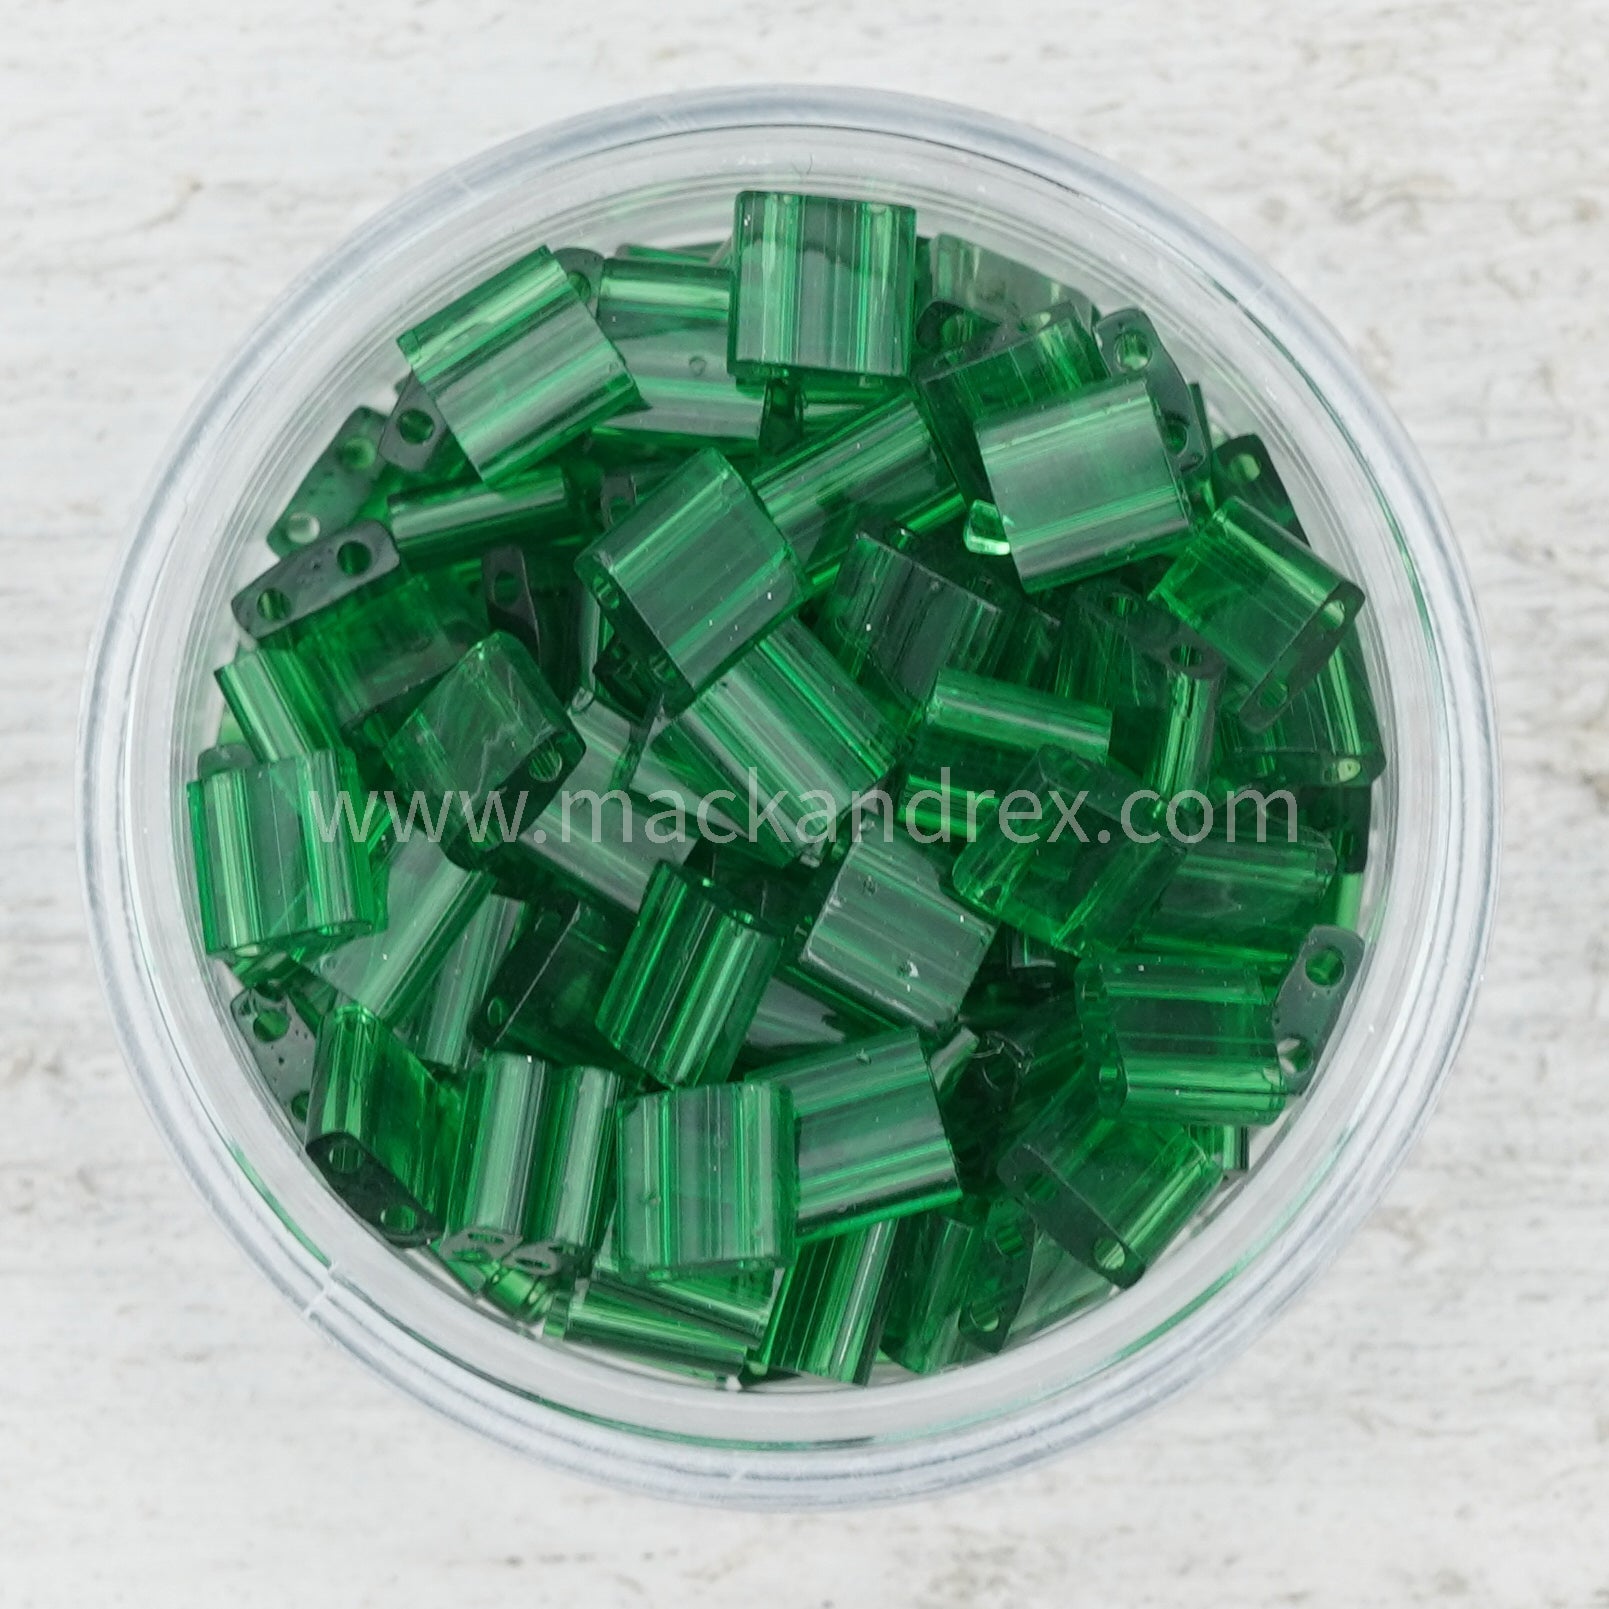 a bowl filled with green glass beads